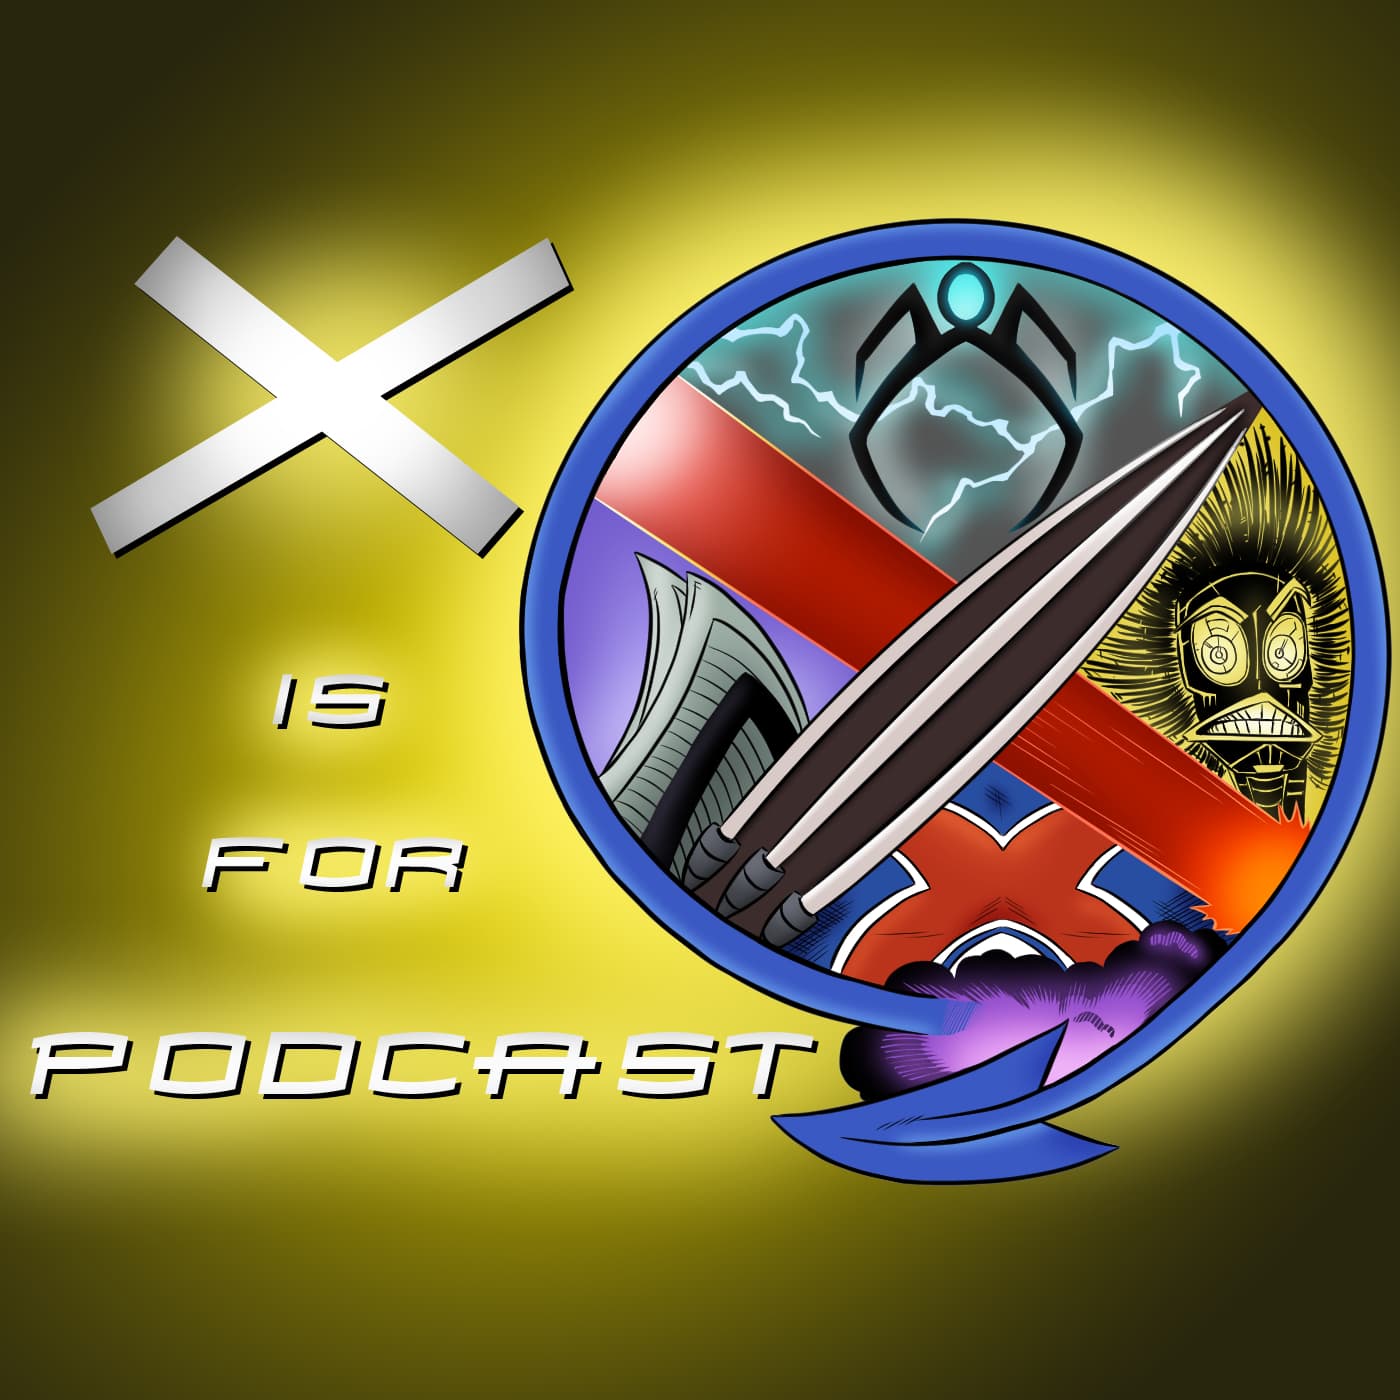 X is for Podcast